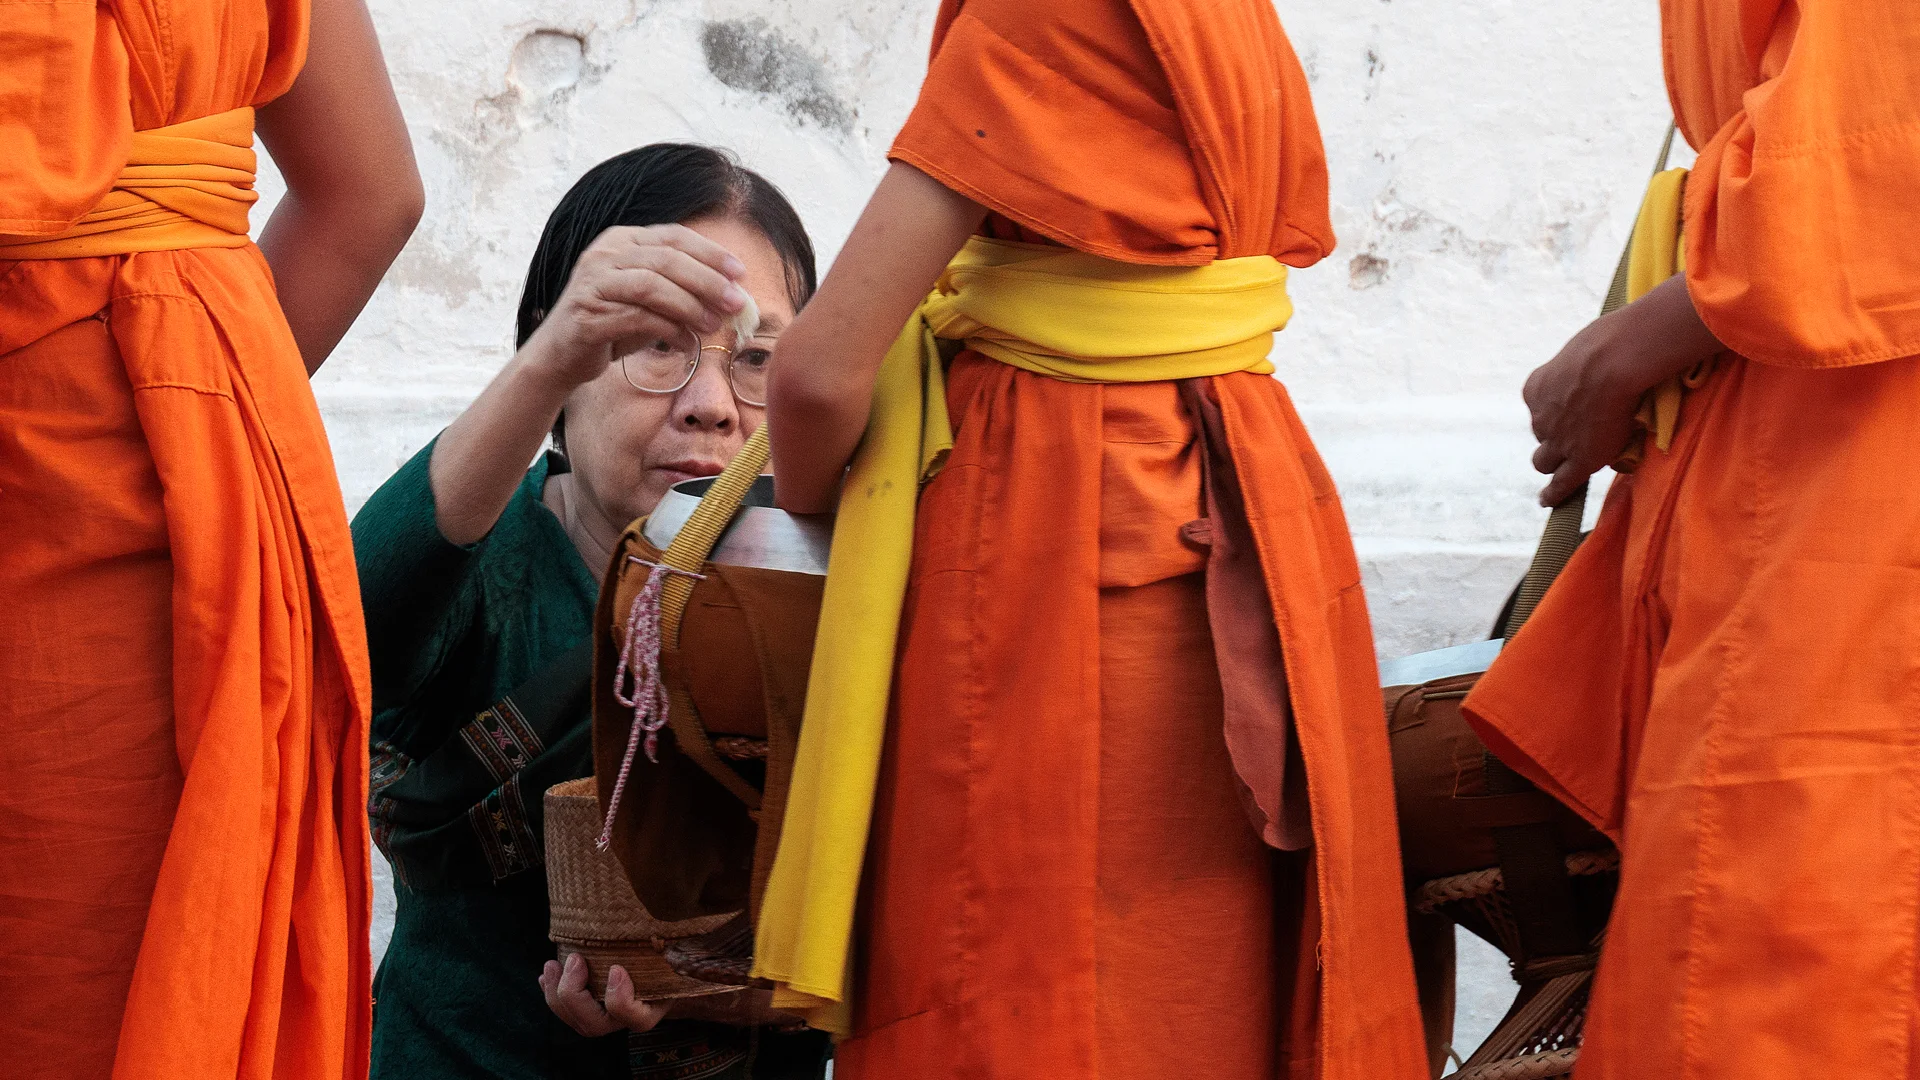 Old women giving food to a young monk at the Alms Ceremony of Luang Prabang in Laos